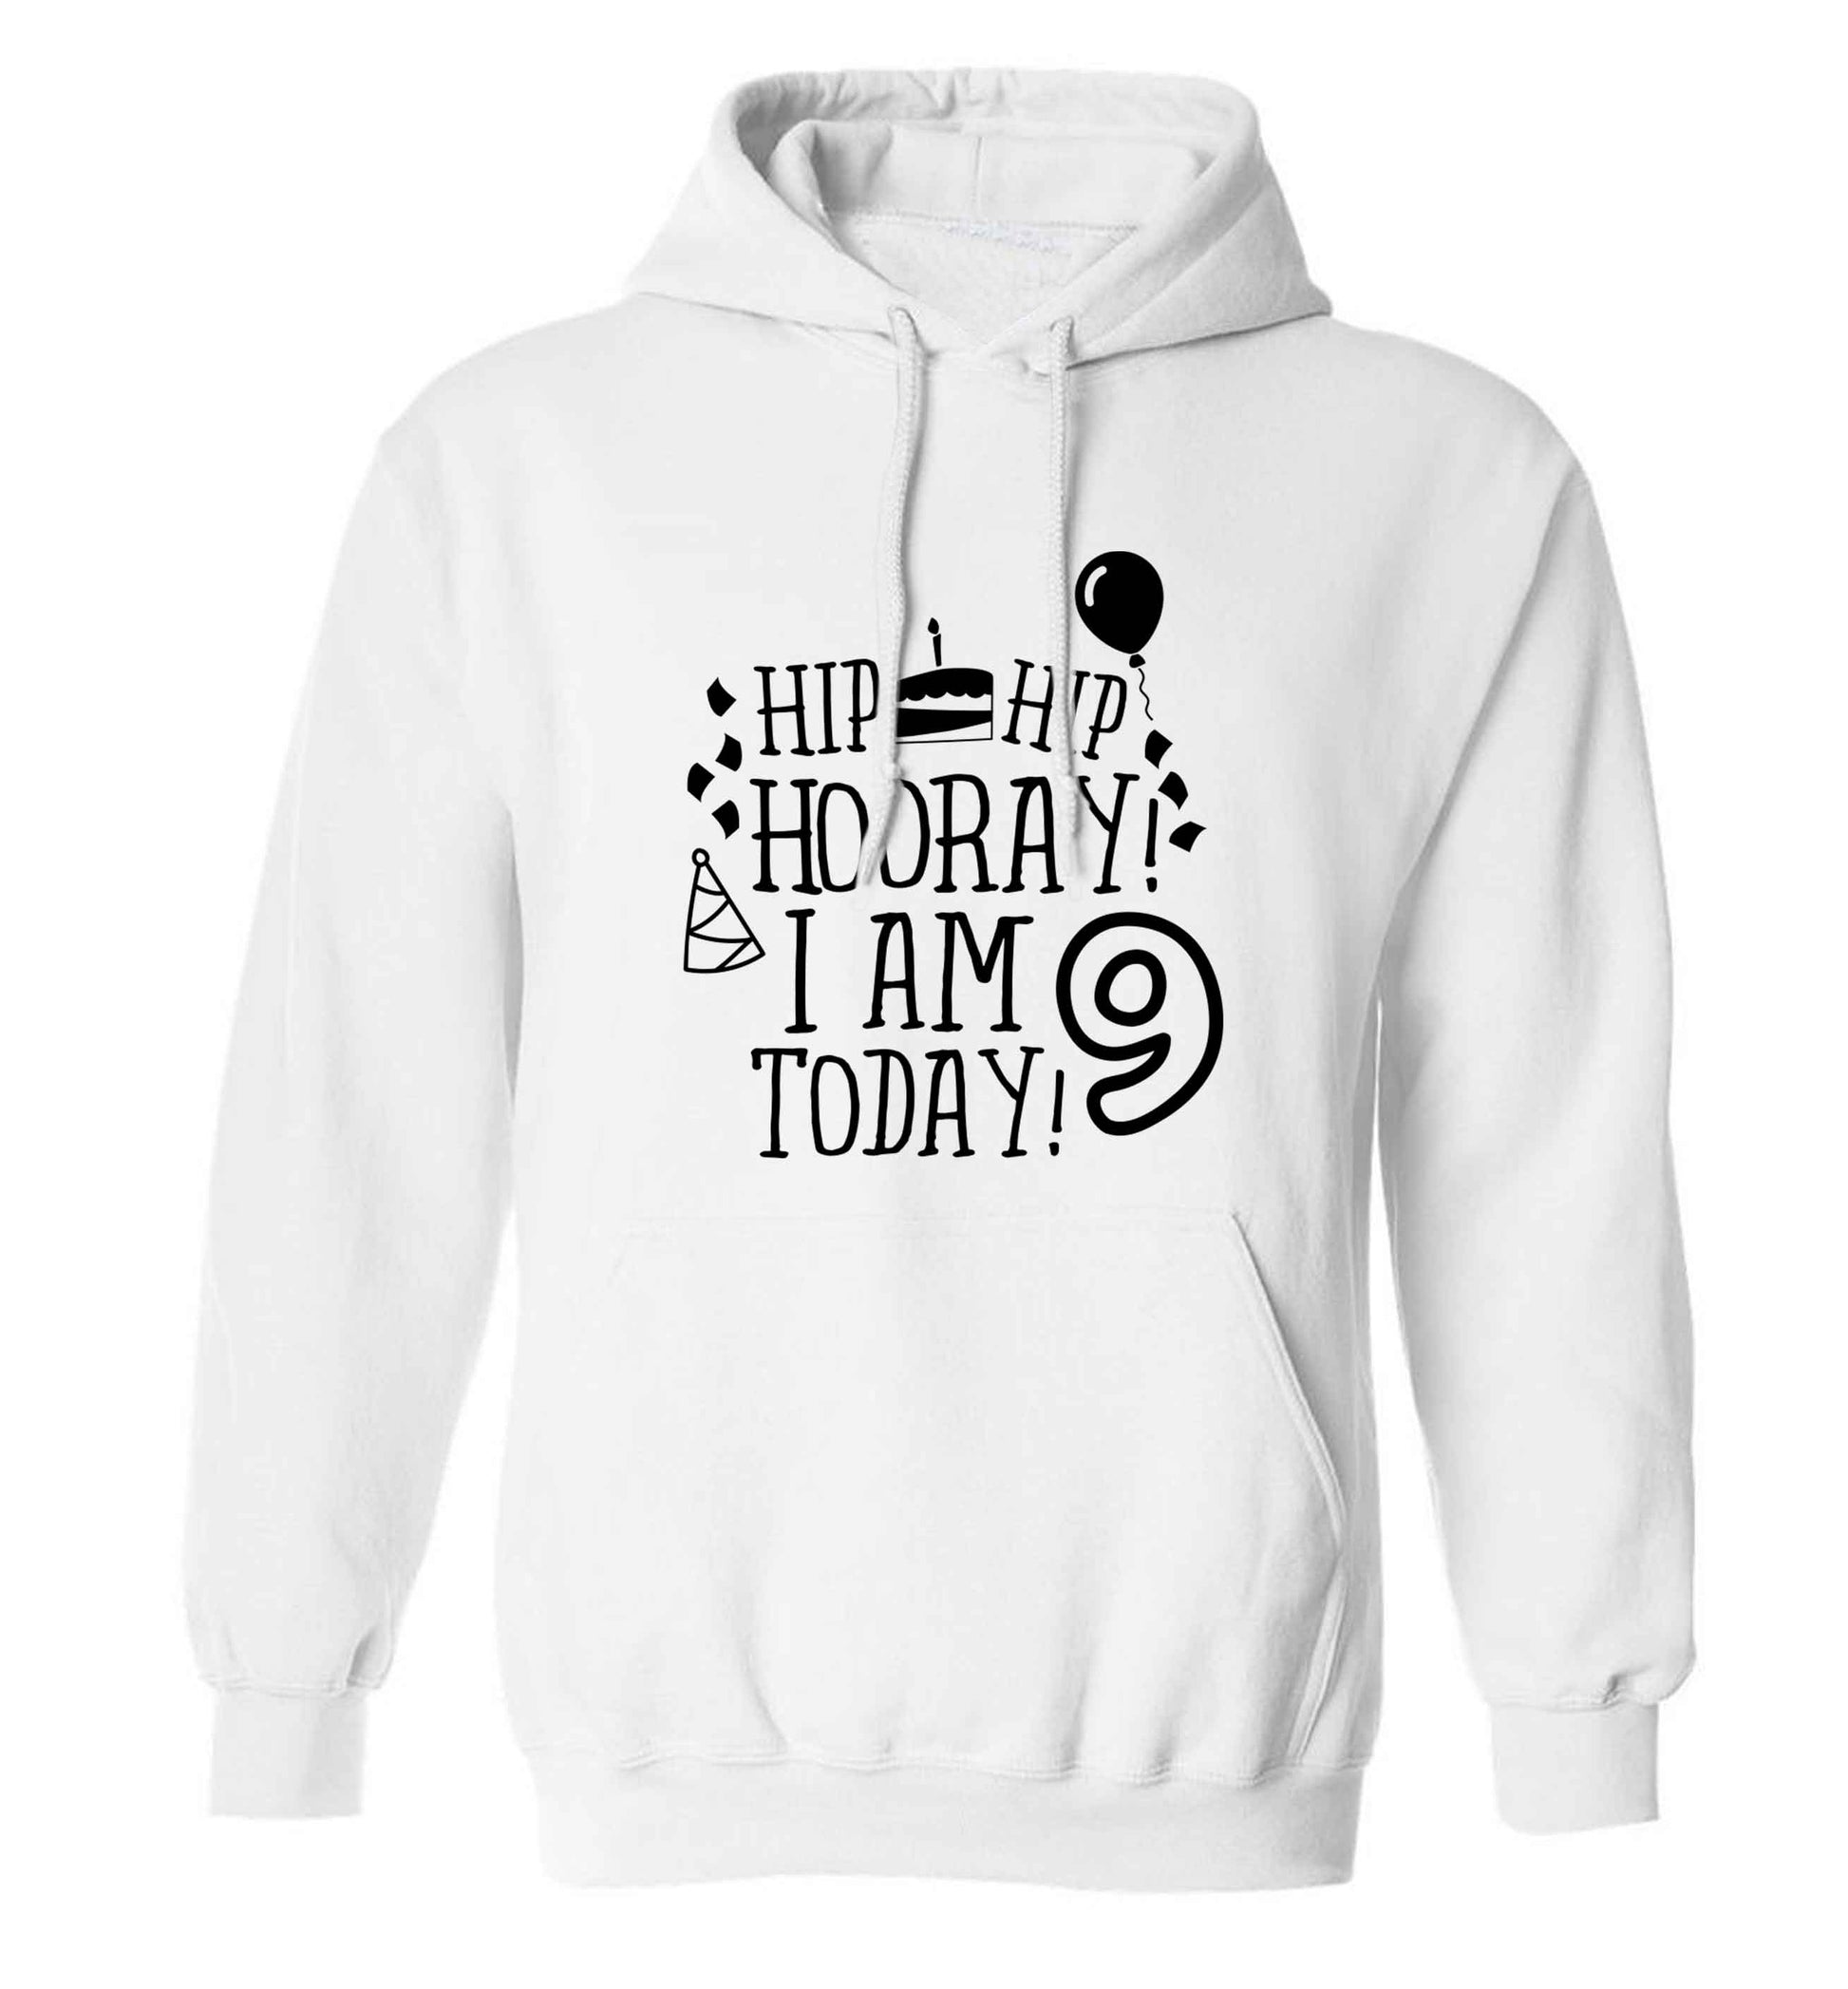 Hip hip hooray I am 9 today! adults unisex white hoodie 2XL